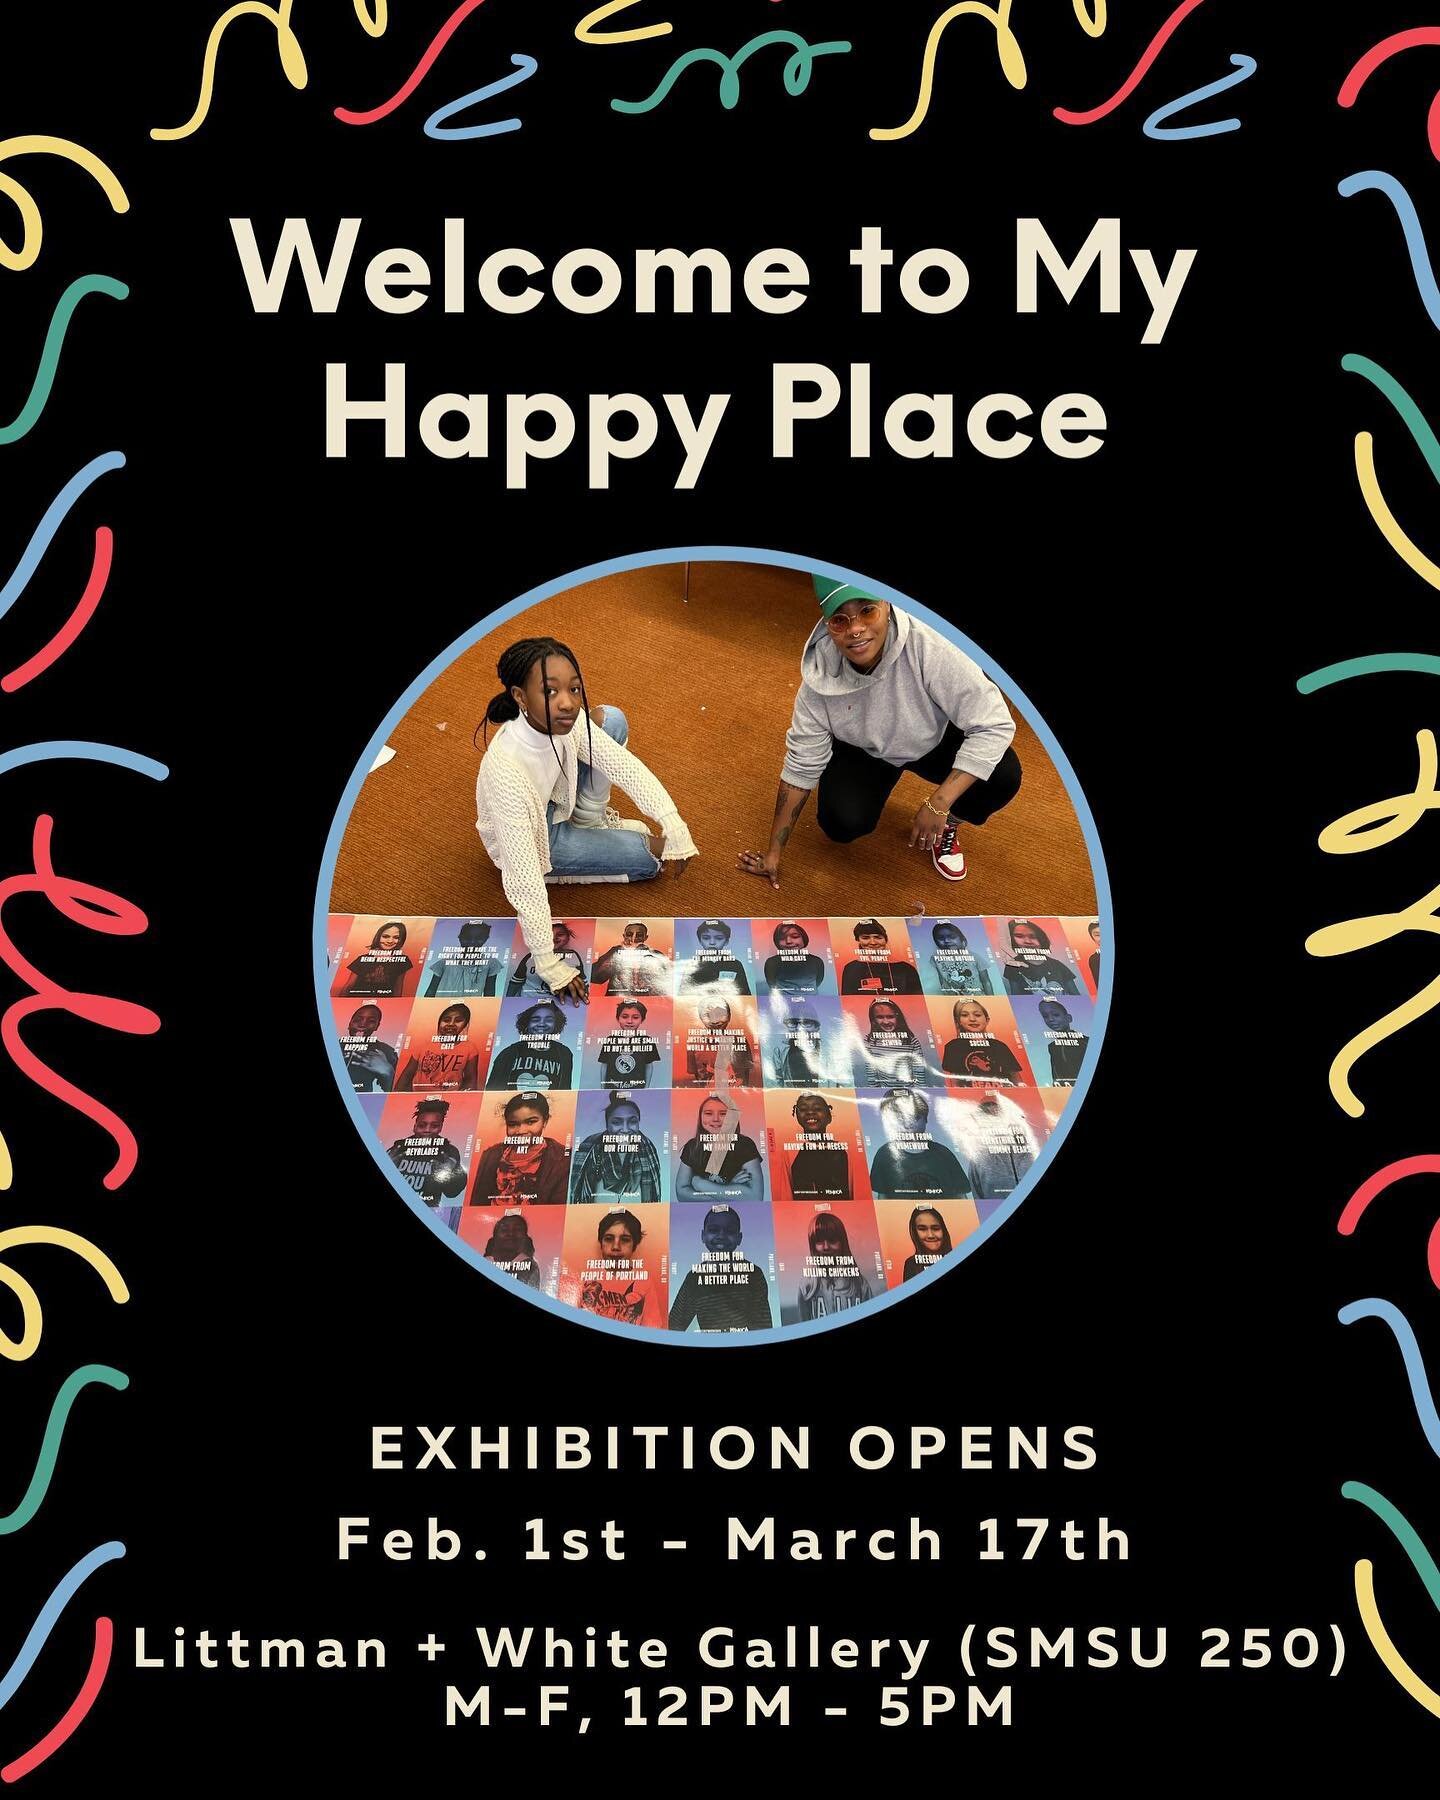 We are excited for tomorrow&rsquo;s in-person KSMoCA opening at PSU&rsquo;s @littmanandwhite gallery. Come by and say hello! You might get to meet Rose, you&rsquo;ll definitely meet Dr. Kiara Hill.

*Welcome to My Happy Place*
an exhibition curated b